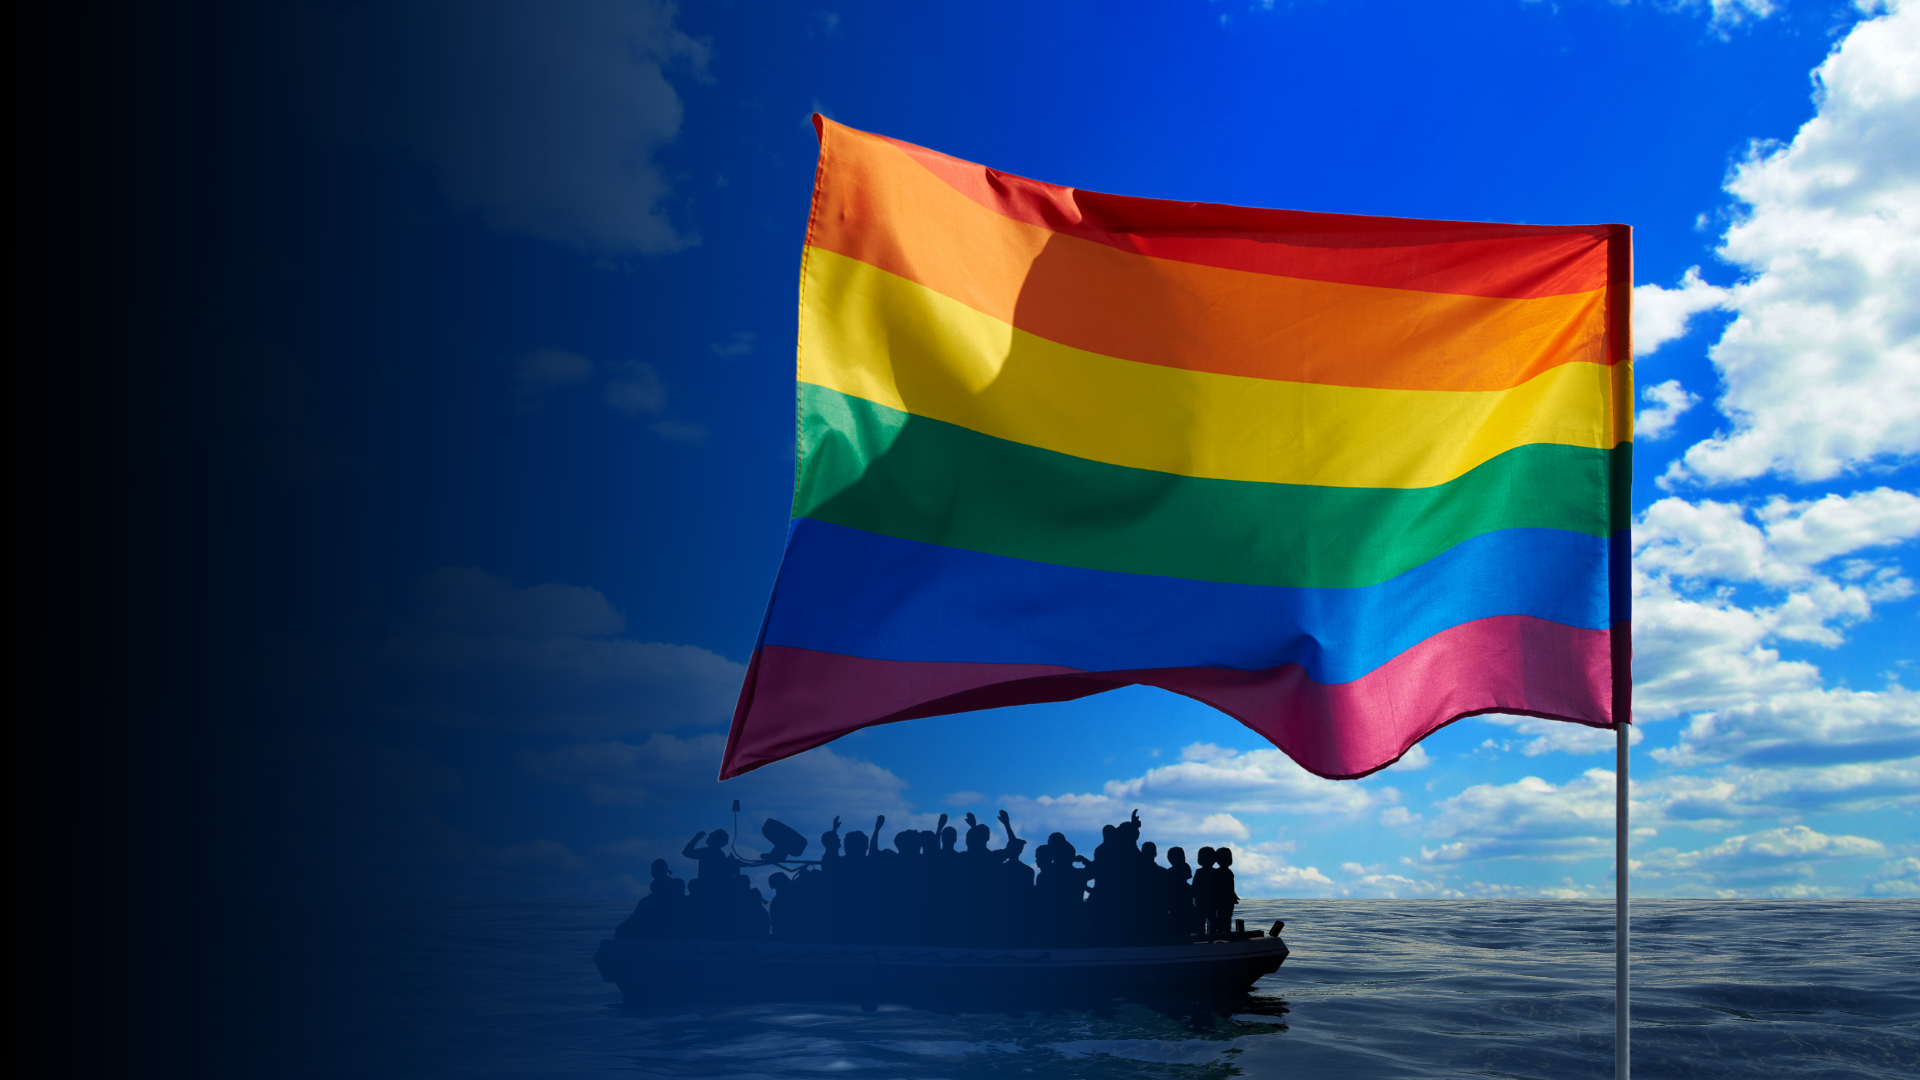 Picture of people on a big rubber boat in open sea over and a pride flag